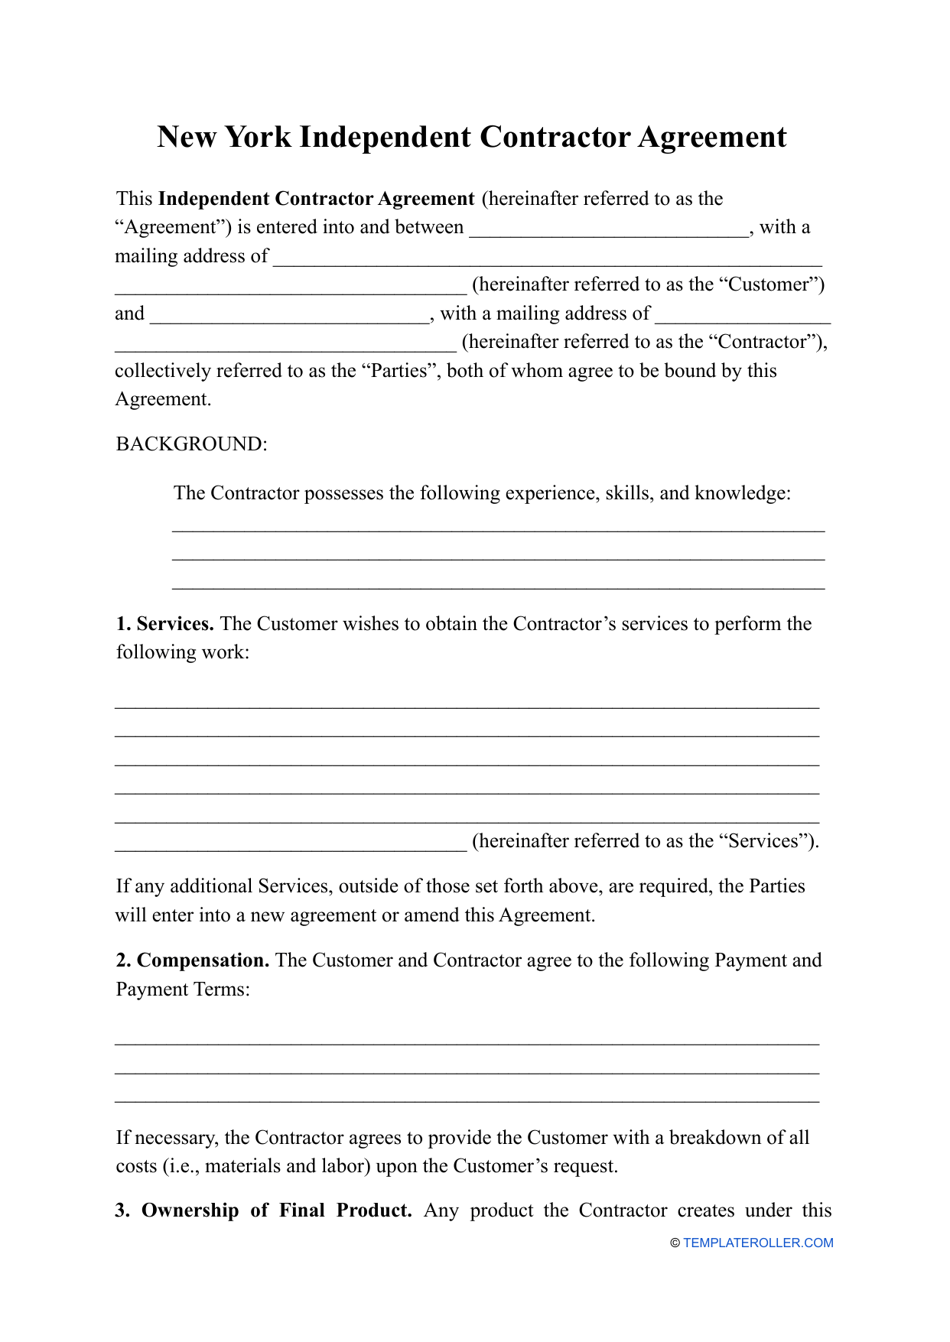 Independent Contractor Agreement Template - New York, Page 1